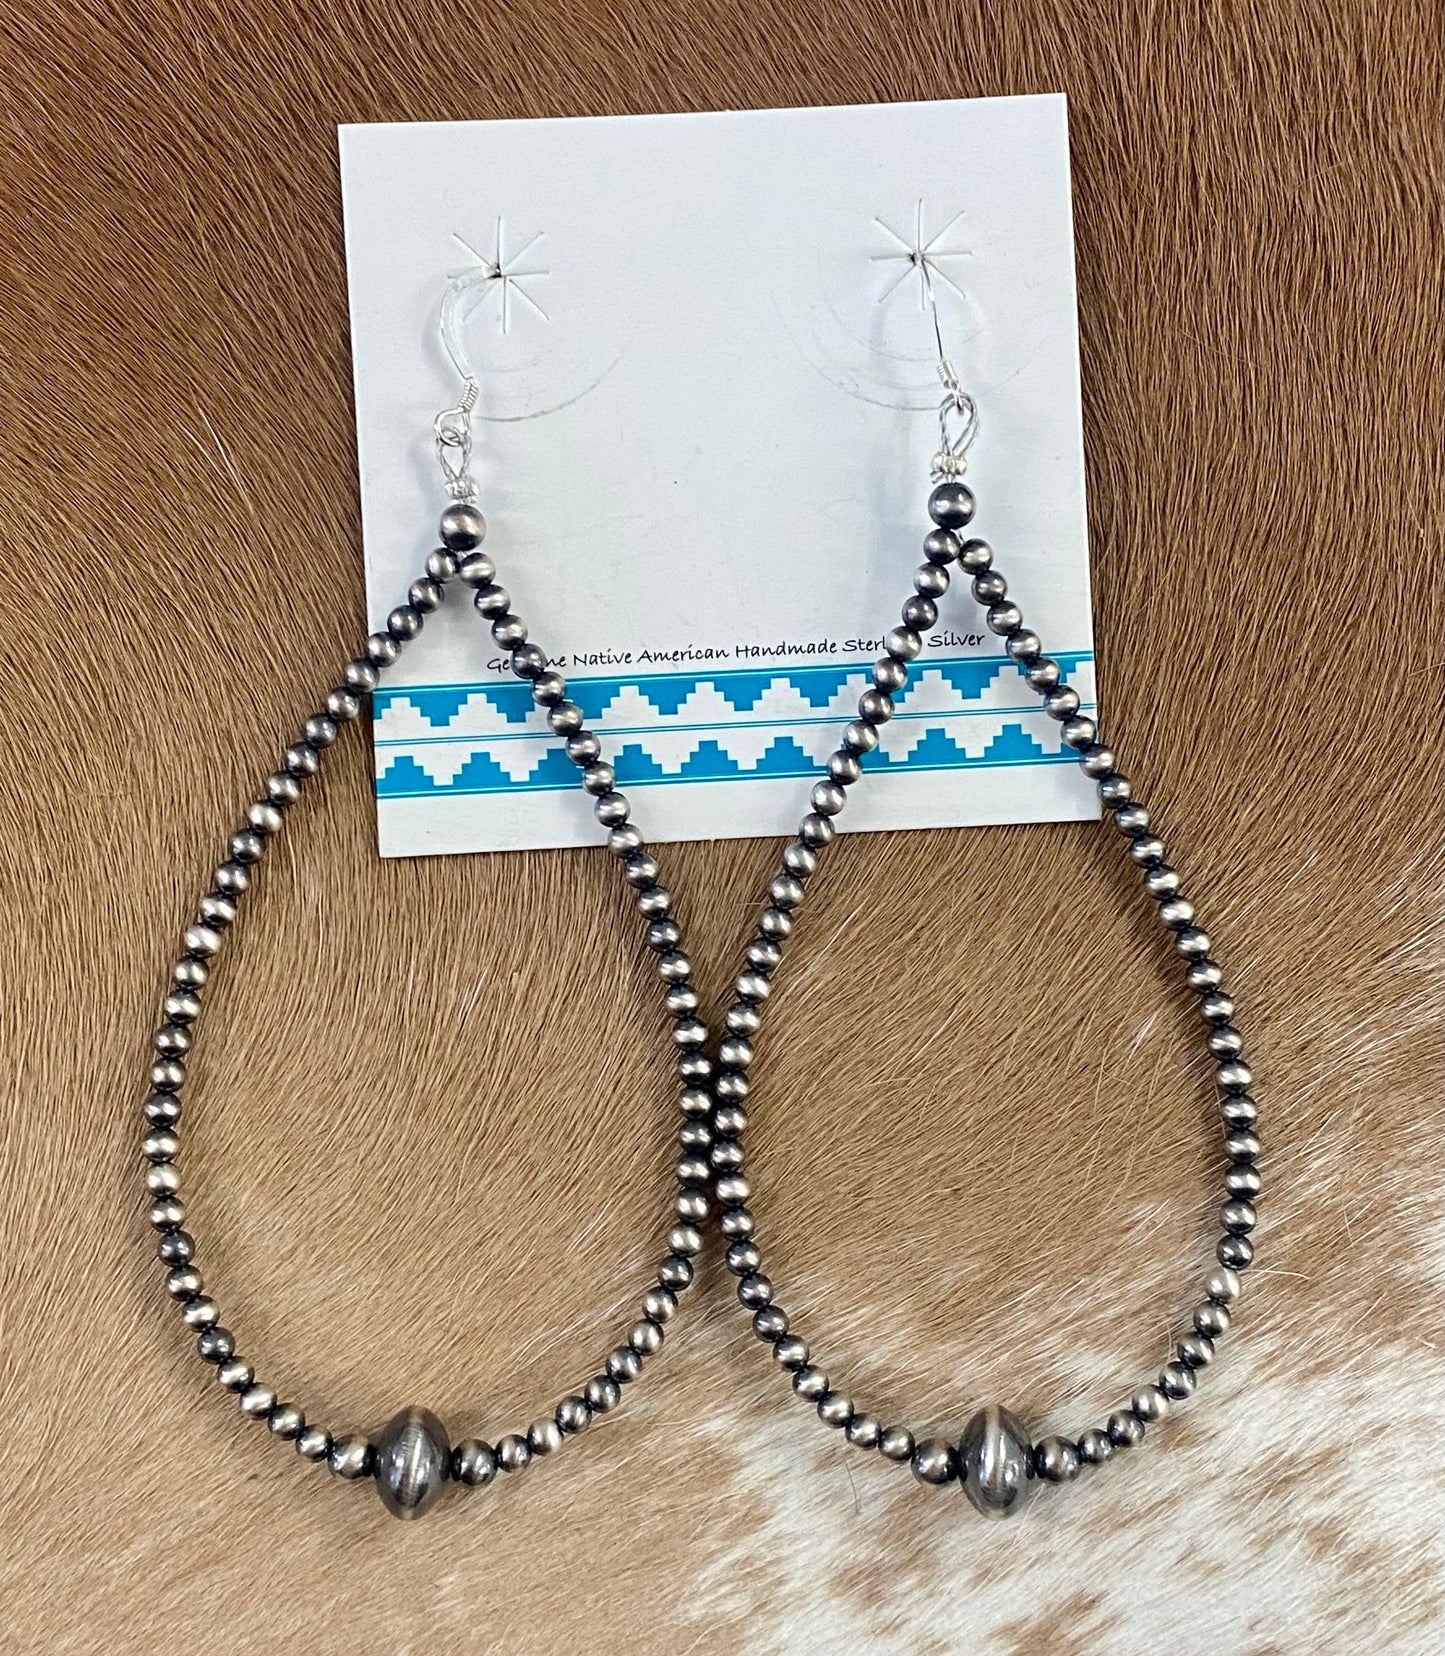 Simple lightweight and gorgeous authentic hand-strung Navajo Pearl sterling silver teardrop earrings. Hook-closure large Navajo Pearl earrings are perfect for everyday casual outfits and dressed-up ones! The perfect simple Navajo Pearl earrings also can be statement earrings.   Size: 4" inches length earrings   Stone: Navajo Pearls 